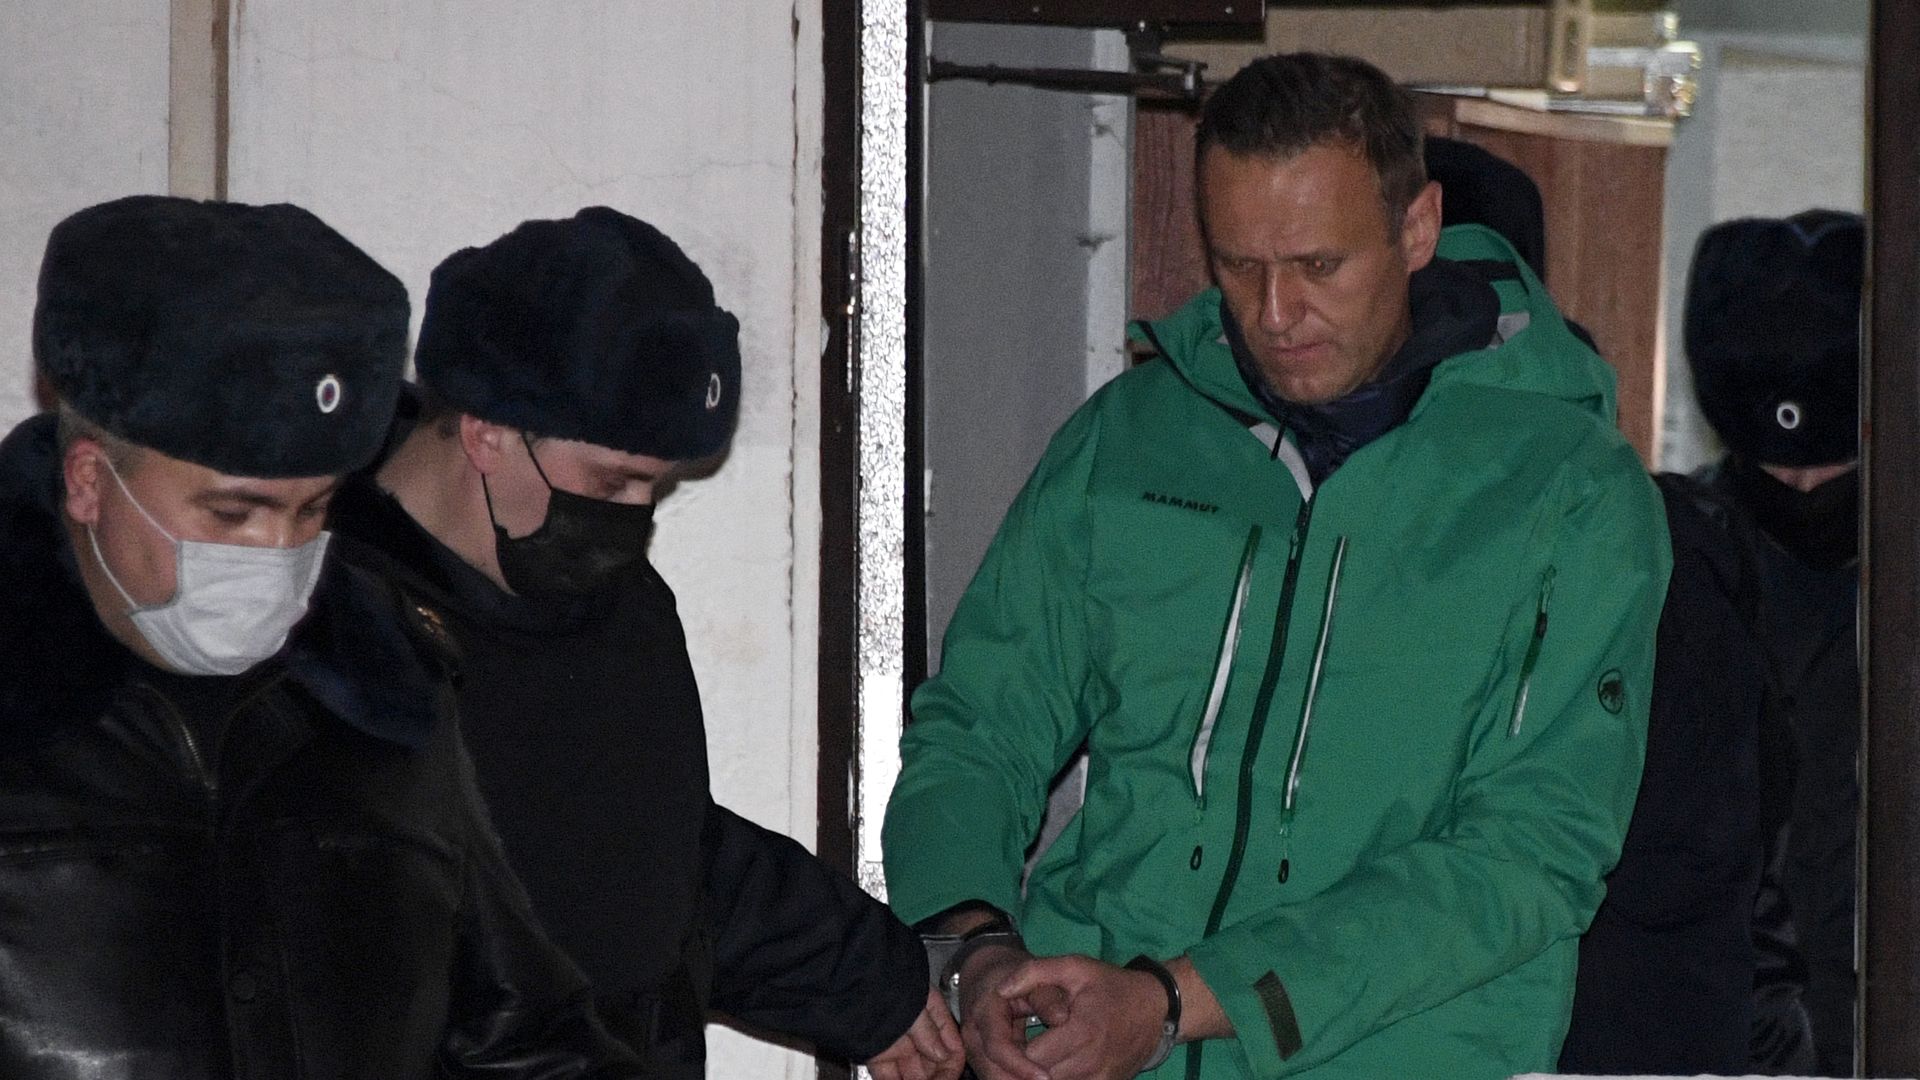 Opposition leader Alexei Navalny is escorted out of a police station on January 18, 2021, in Khimki, outside Moscow.